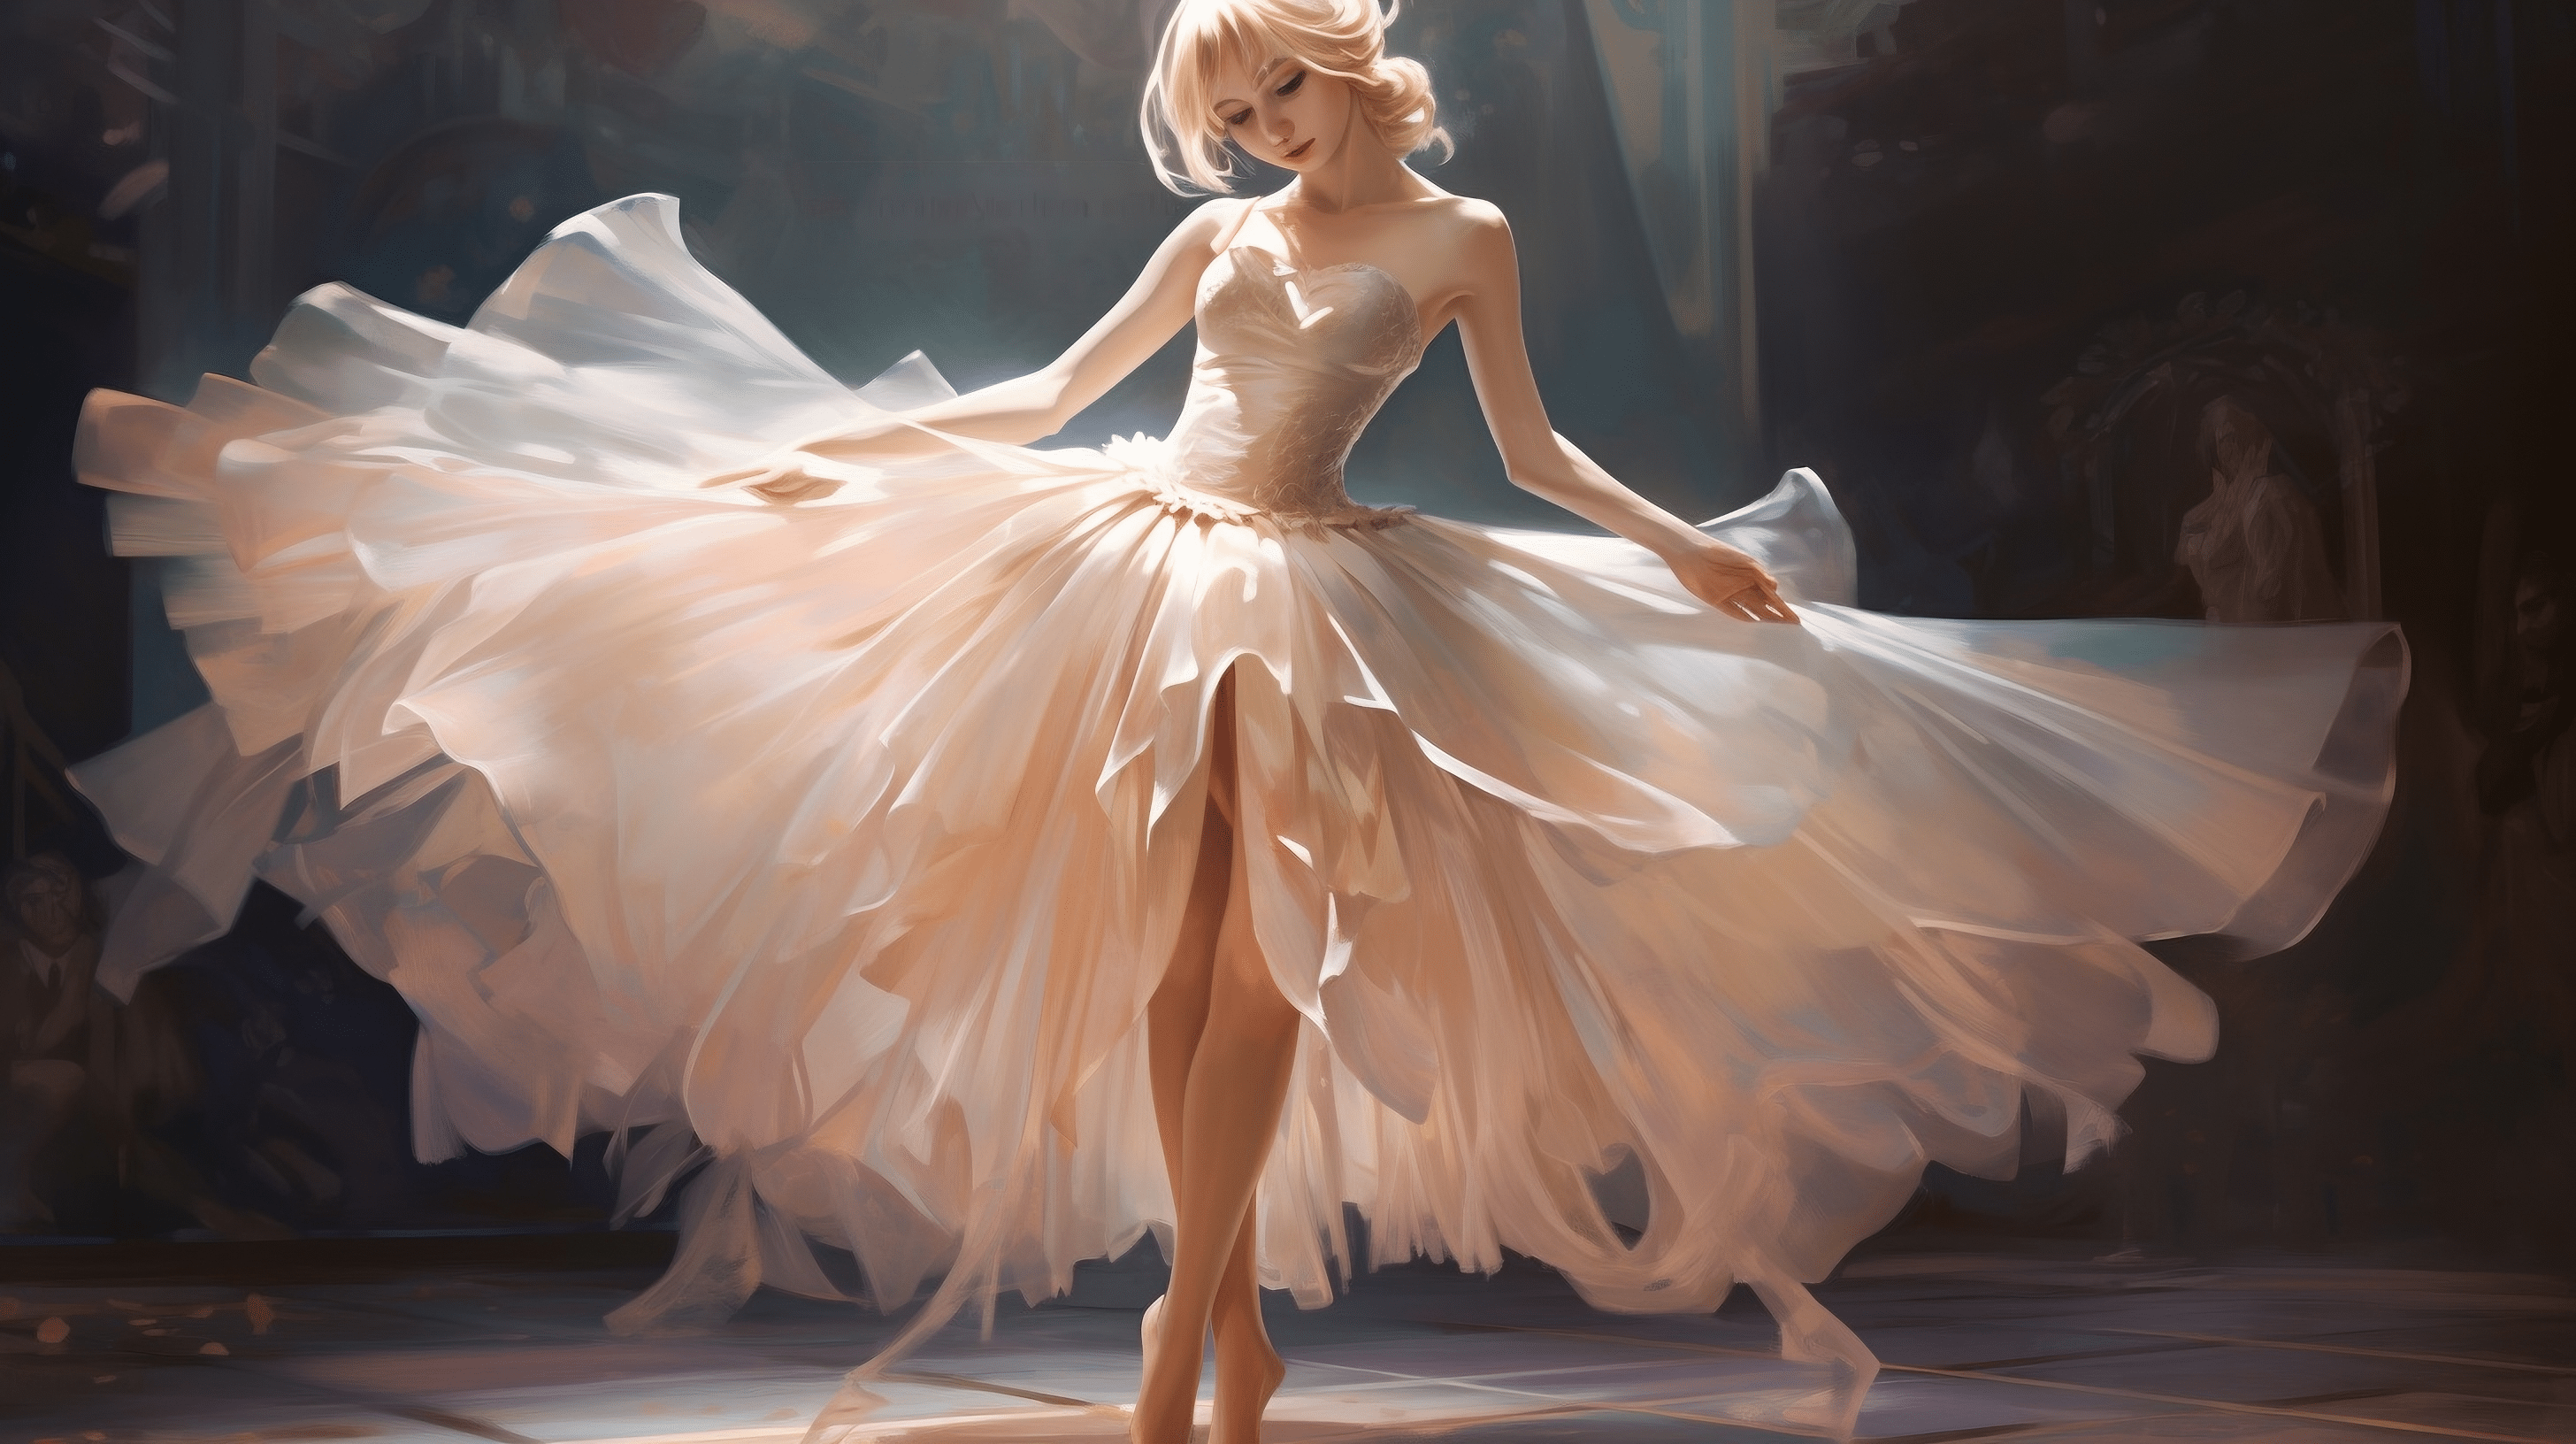 A beautiful girl in a white dress is dancing on a stage. - Desktop, anime, ballet